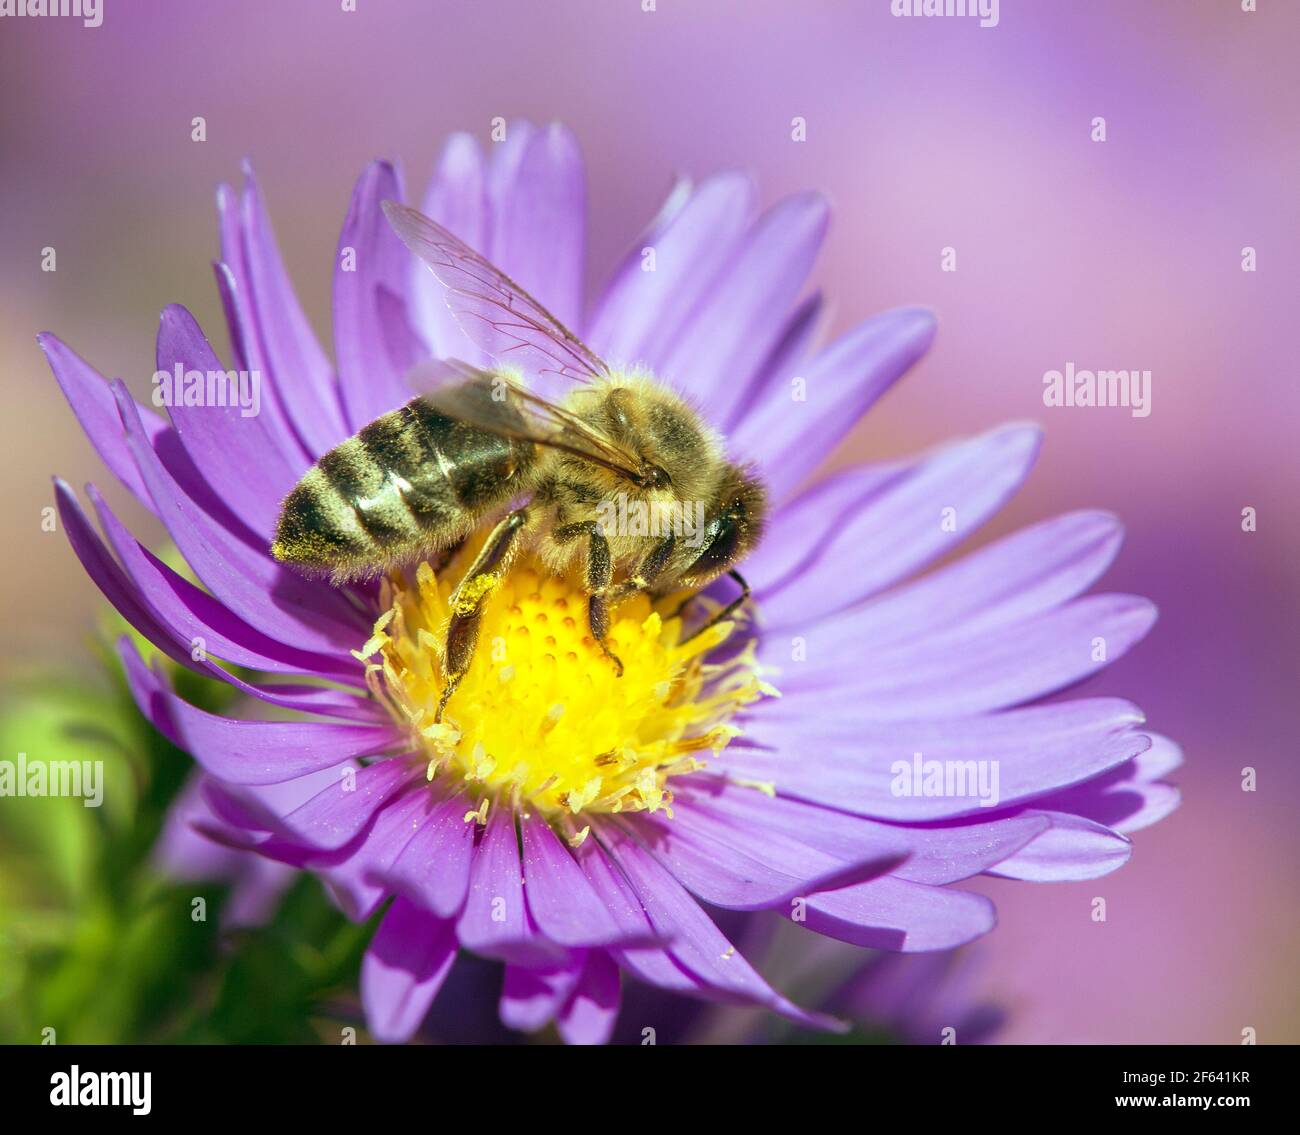 detail of bee or honeybee in Latin Apis Mellifera, european or western honey bee pollinated the yellow violet purple or blue flower Stock Photo